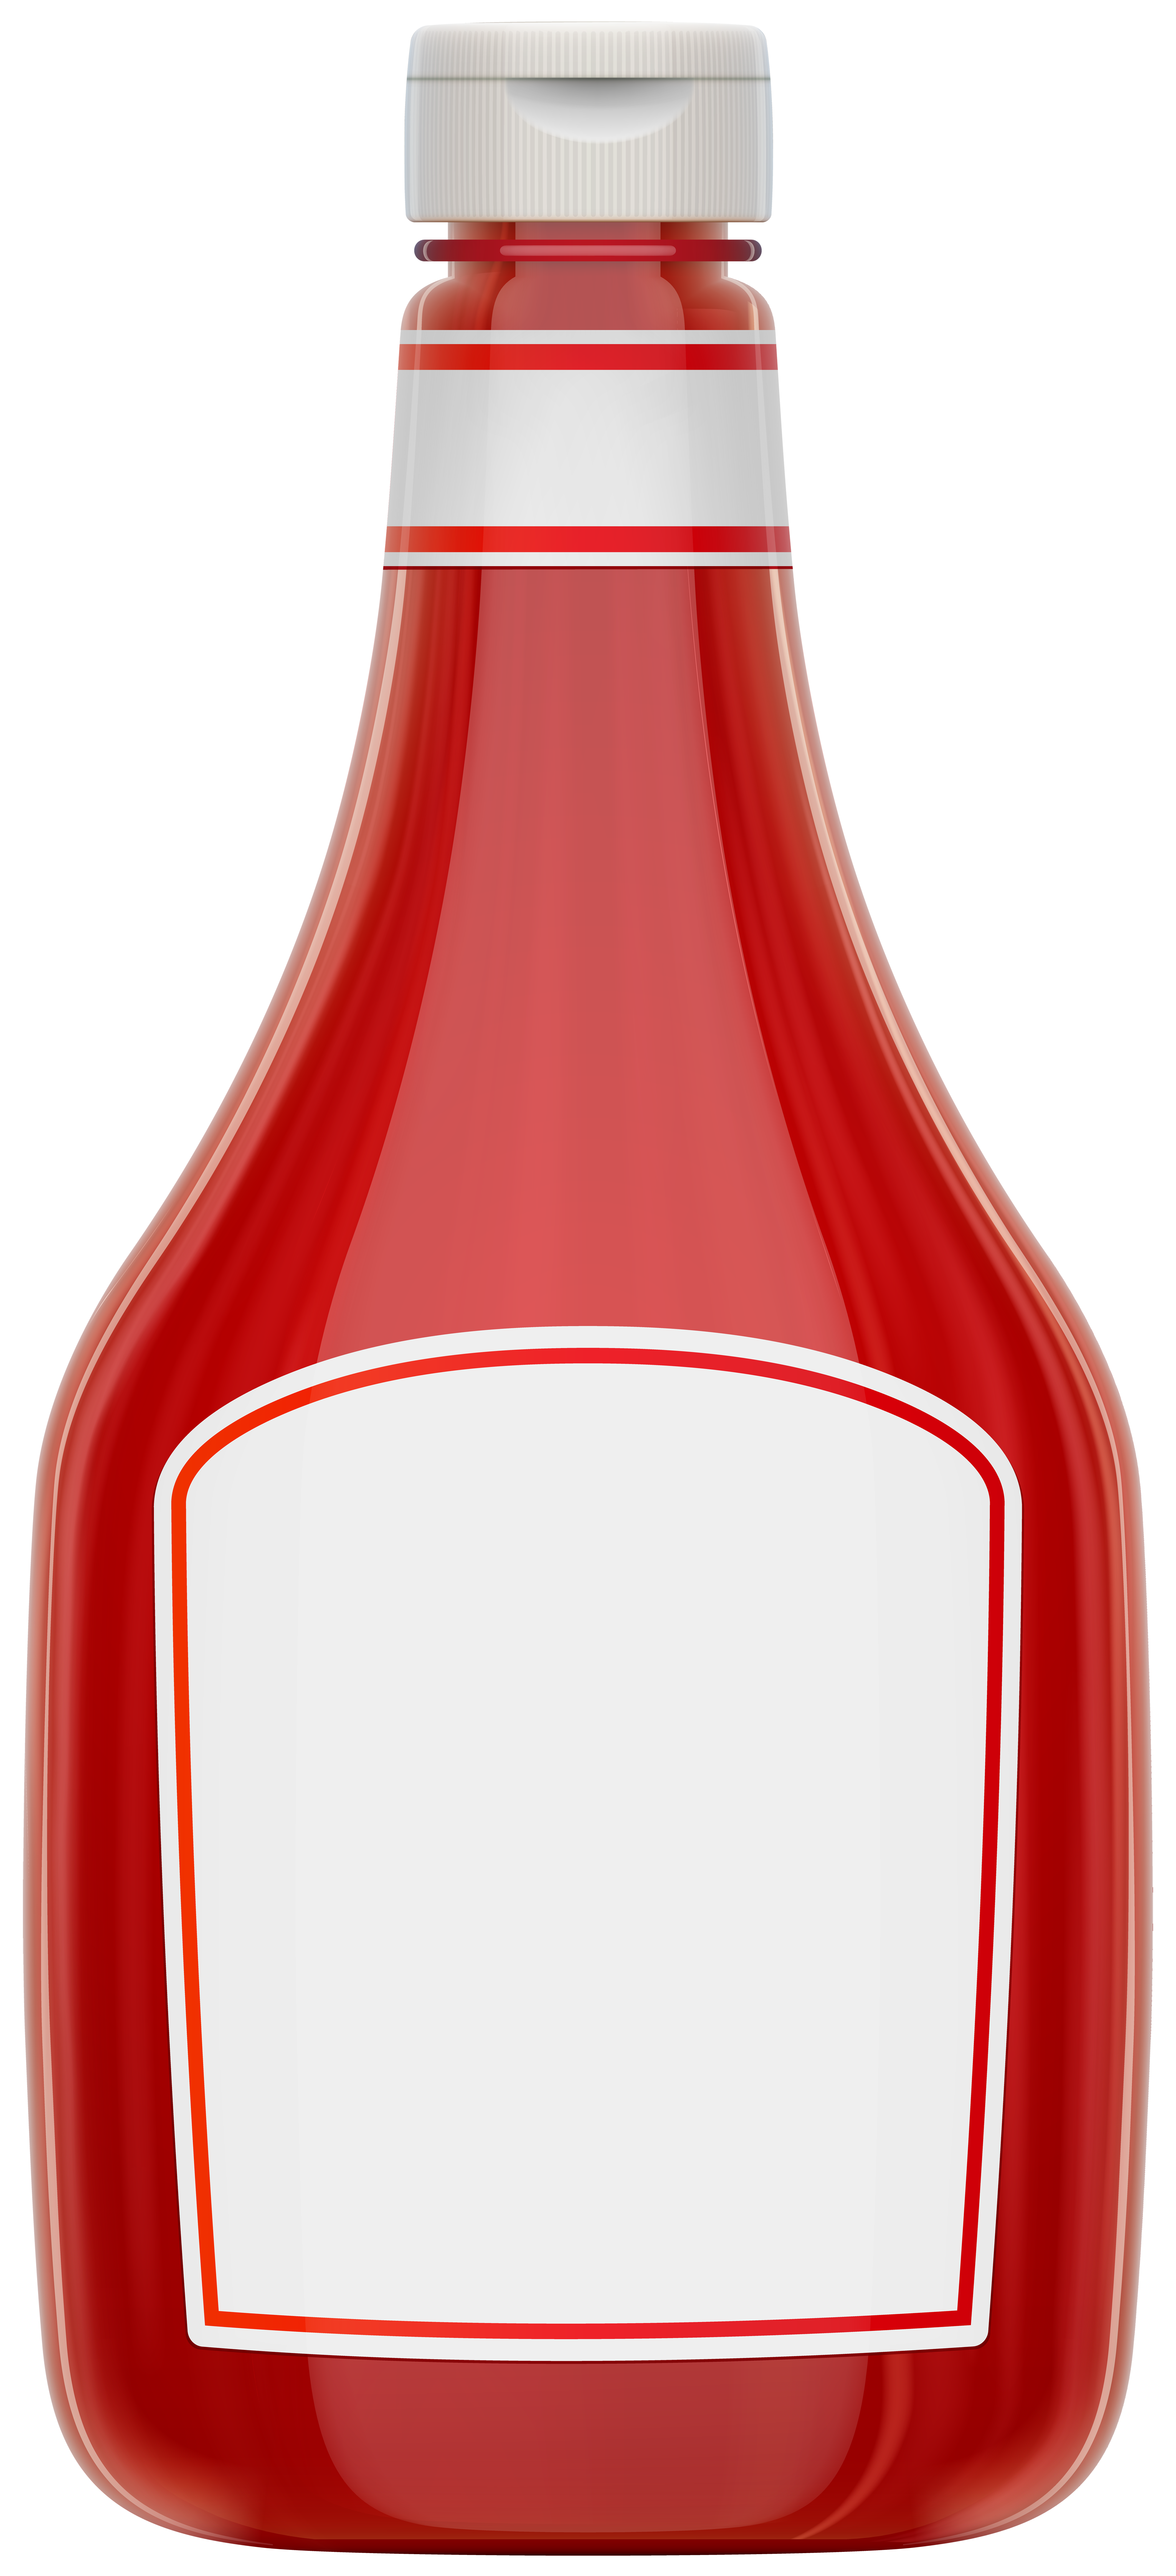 Ketchup Bottle Transparent Image​  Gallery Yopriceville - High-Quality  Free Images and Transparent PNG Clipart